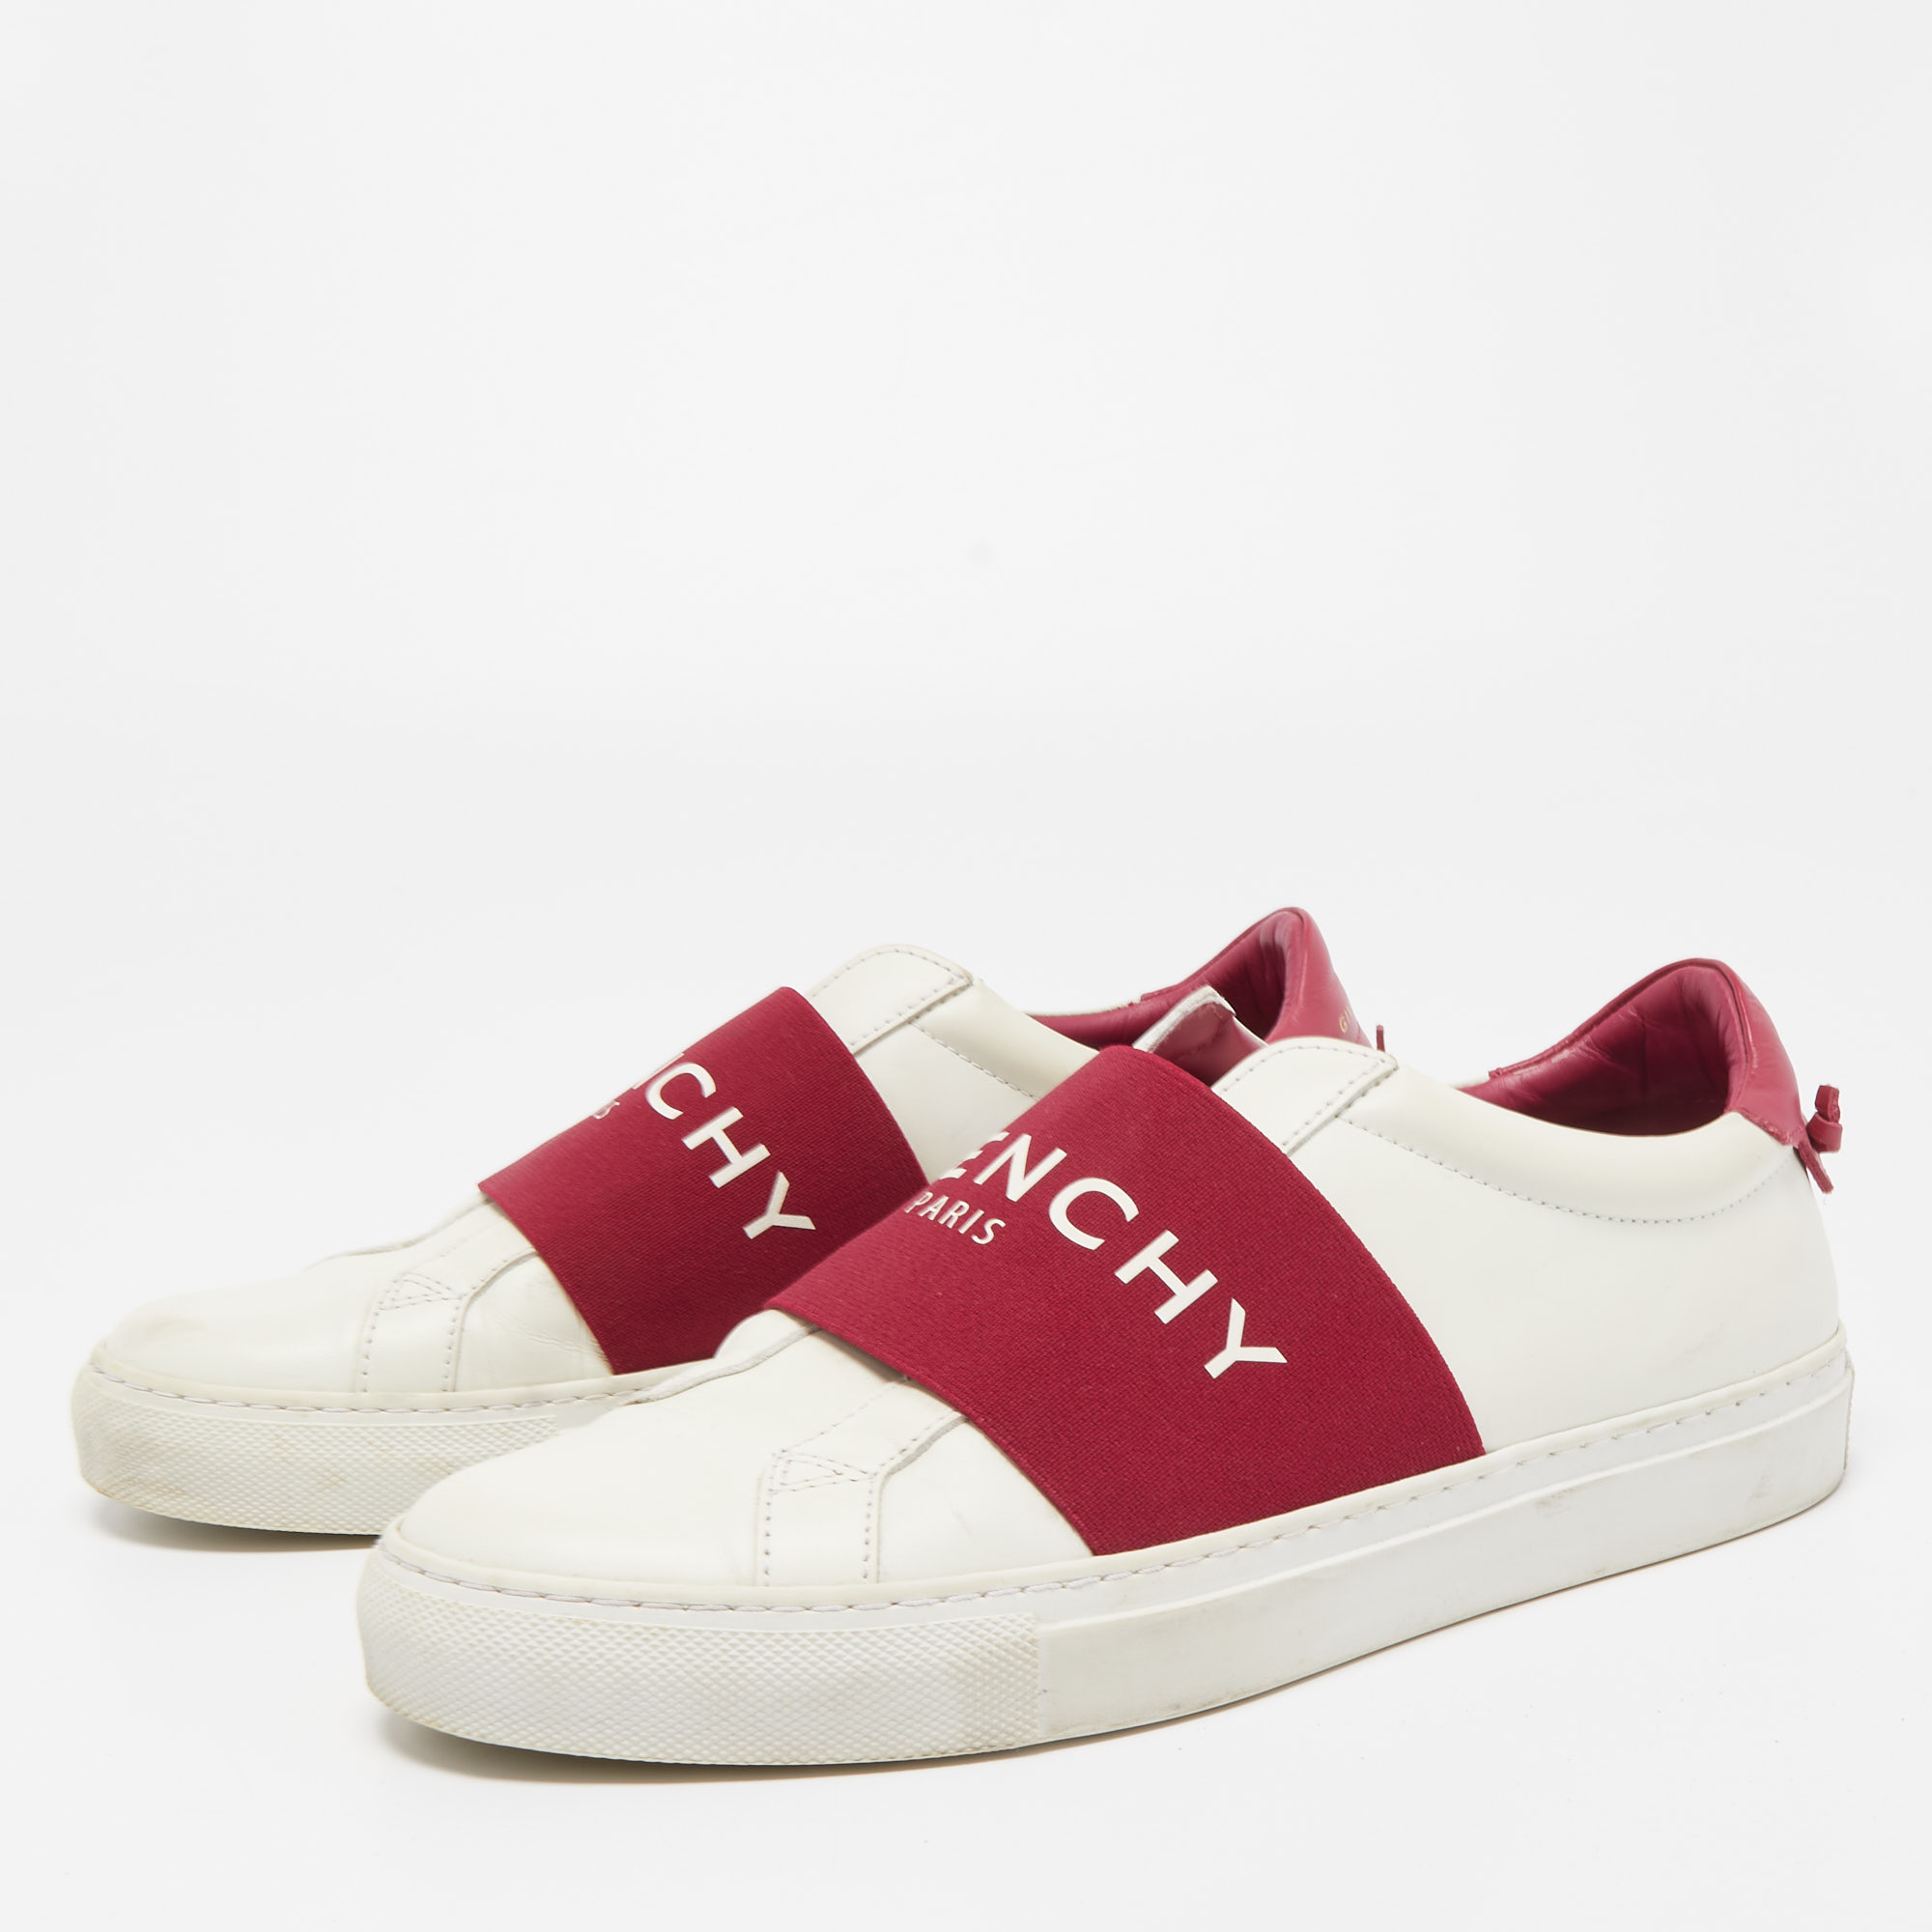 

Givenchy White/Red Leather Urban Street Logo Slip On Sneakers Size